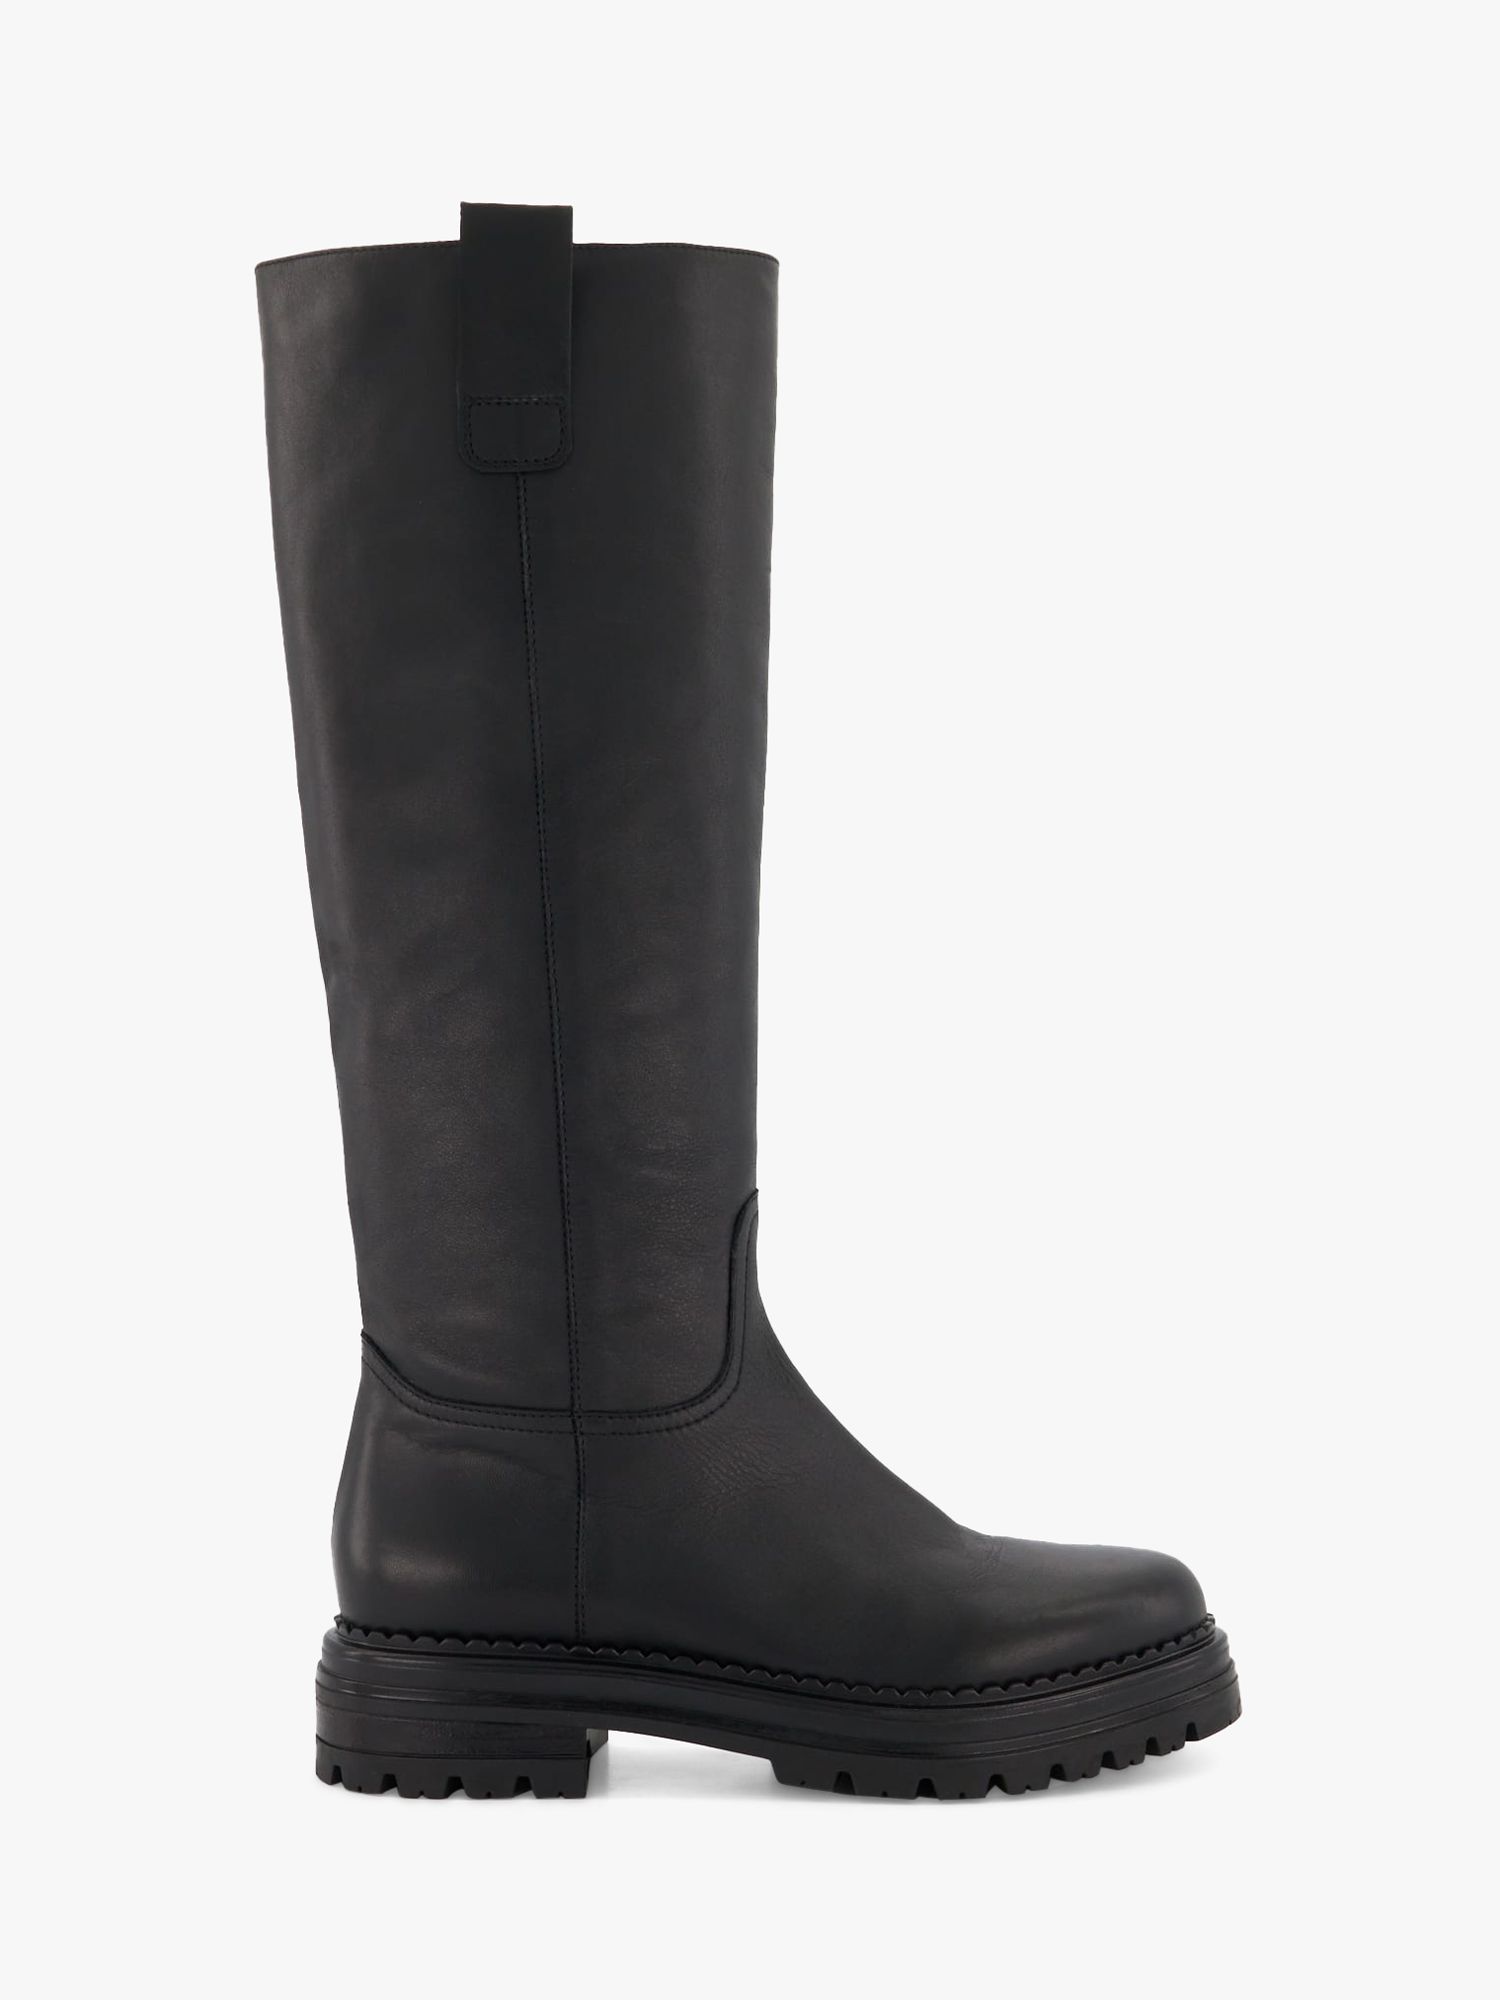 Buy Dune Tristina Chunky Sole Leather Knee Boots, Black Online at johnlewis.com